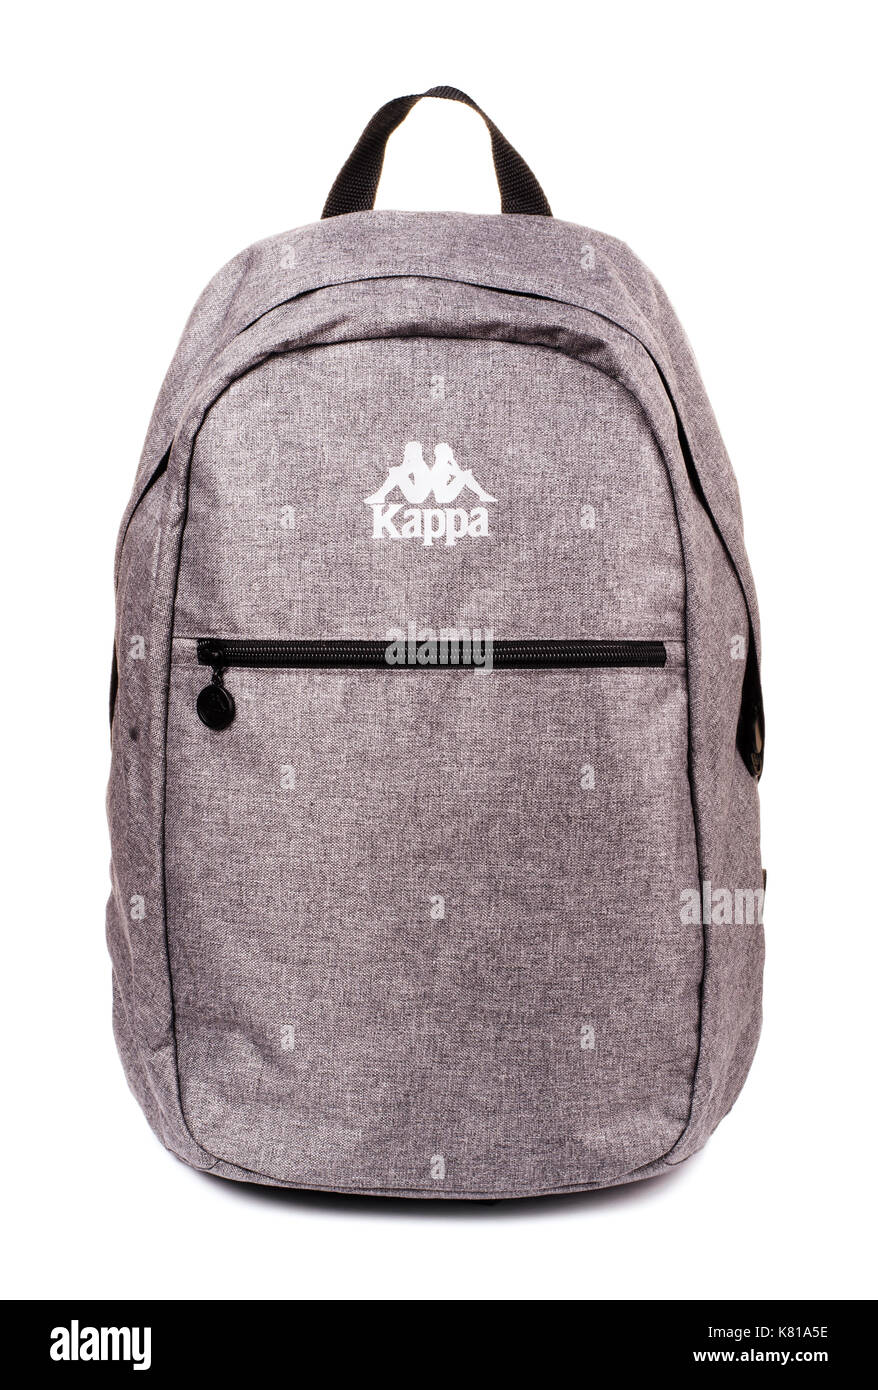 SAMARA, RUSSIA - August 27, 2017: Kappa gray school backpack standing  isolated on white background, illustrative editorial Stock Photo - Alamy